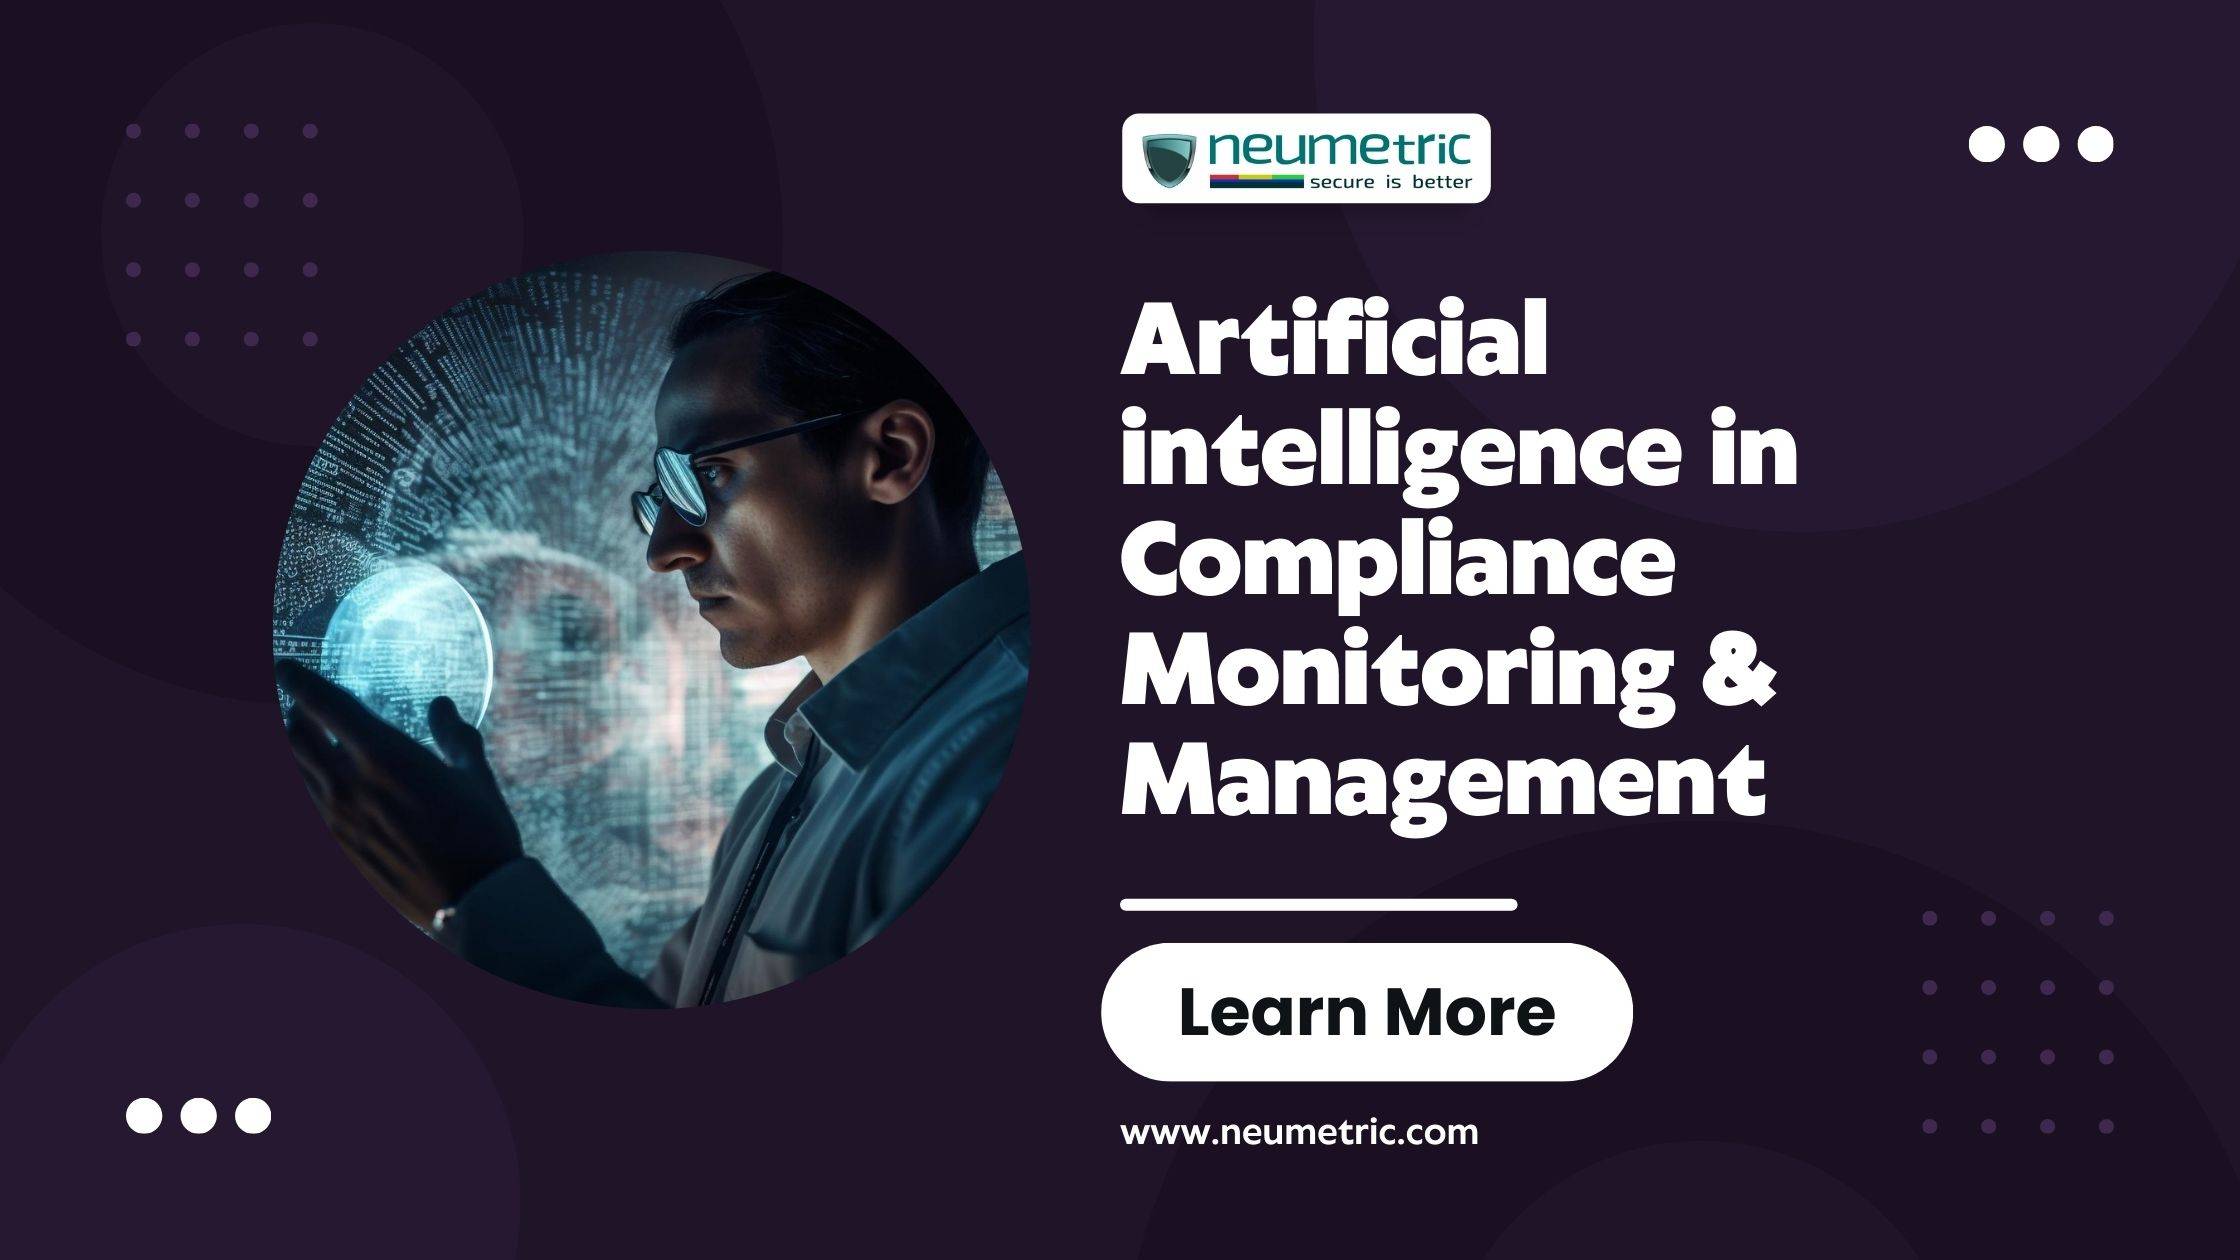 Artificial intelligence in Compliance Monitoring & Management